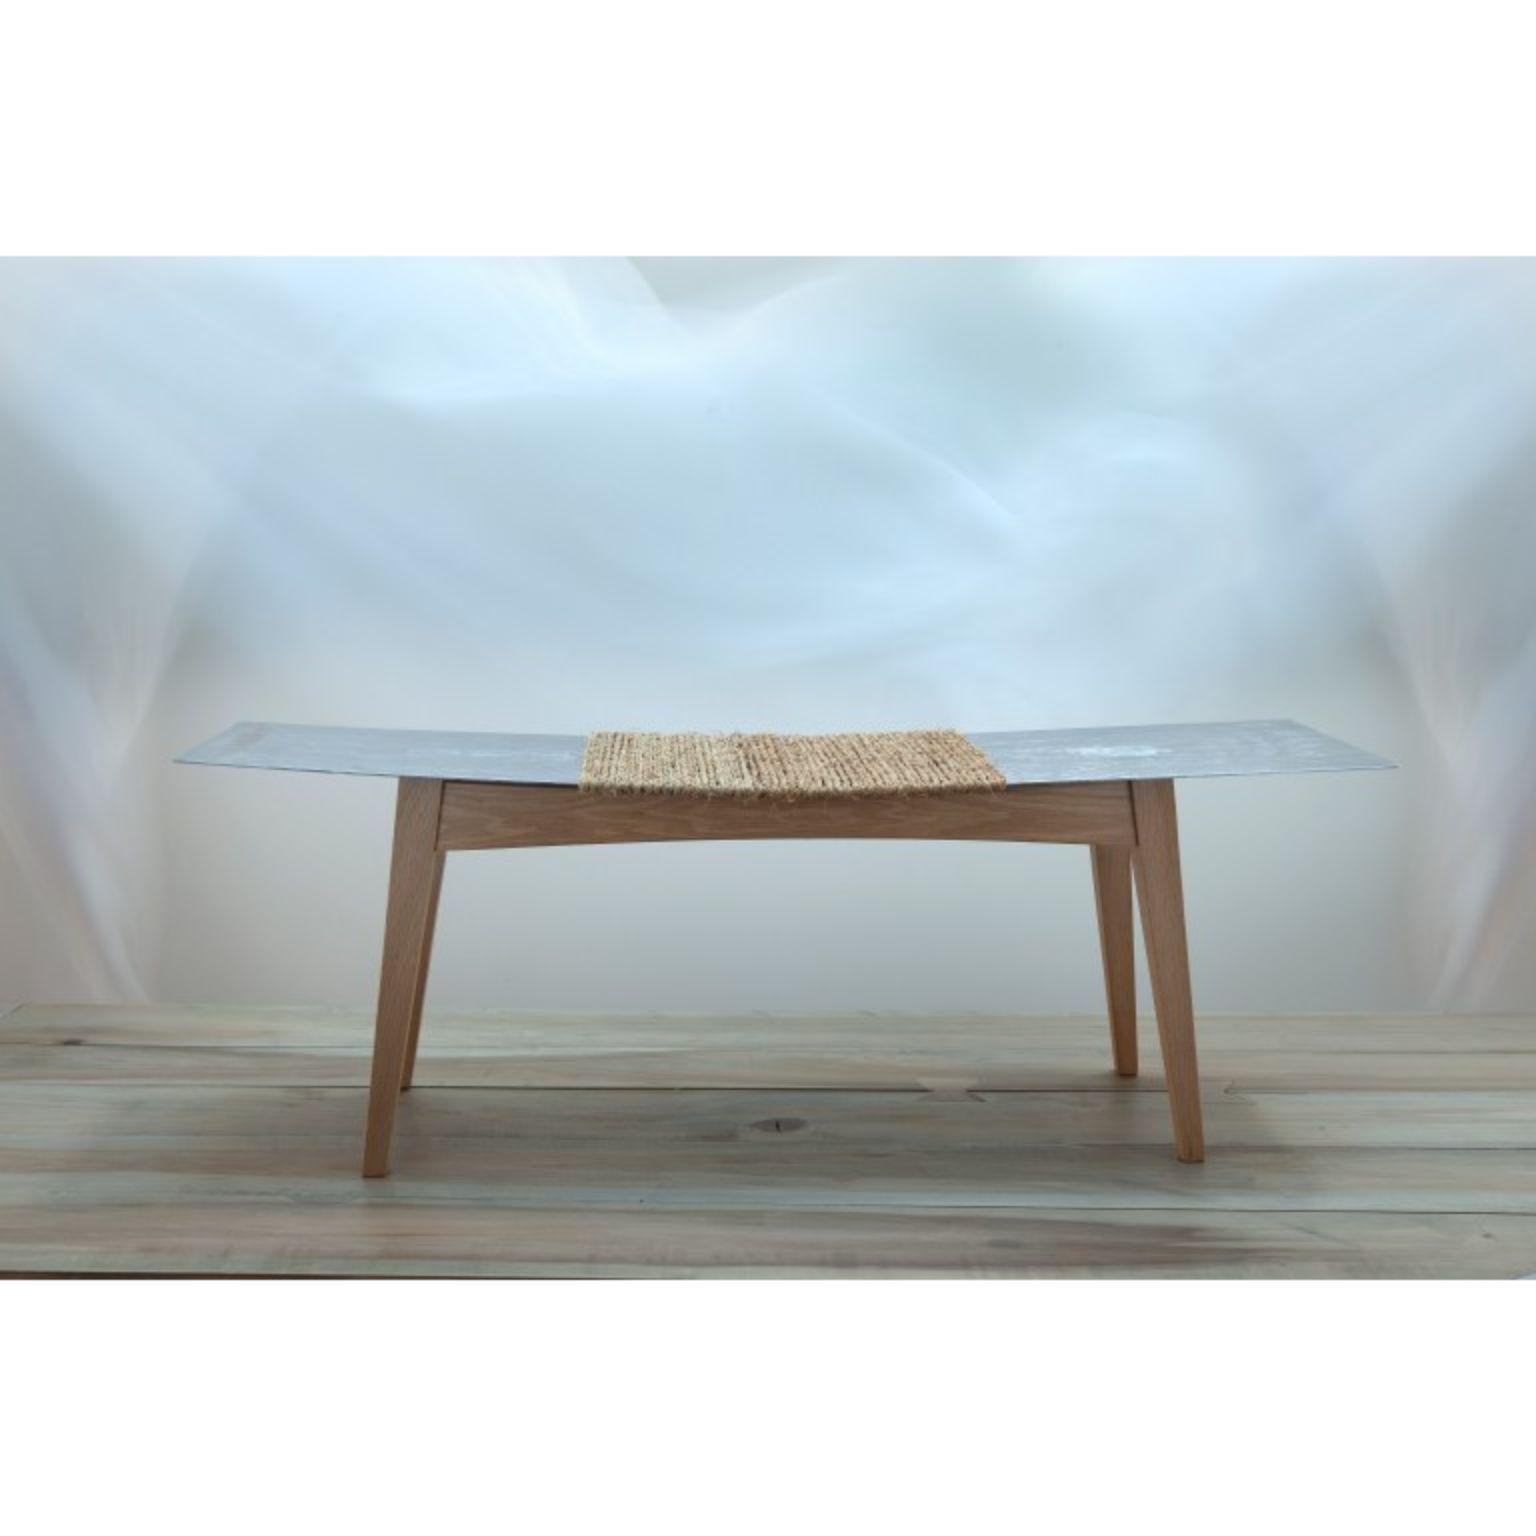 Vol2 bench by Jean-Baptiste Van den Heede
Signed and numbered
Dimensions: L 115 x W 32 x H 43 cm
Materials: Oakwood, metal sheet seat, Natural handwoven esparto fiber

The VOL2 bench is a piece of furniture for the entrance to the house,